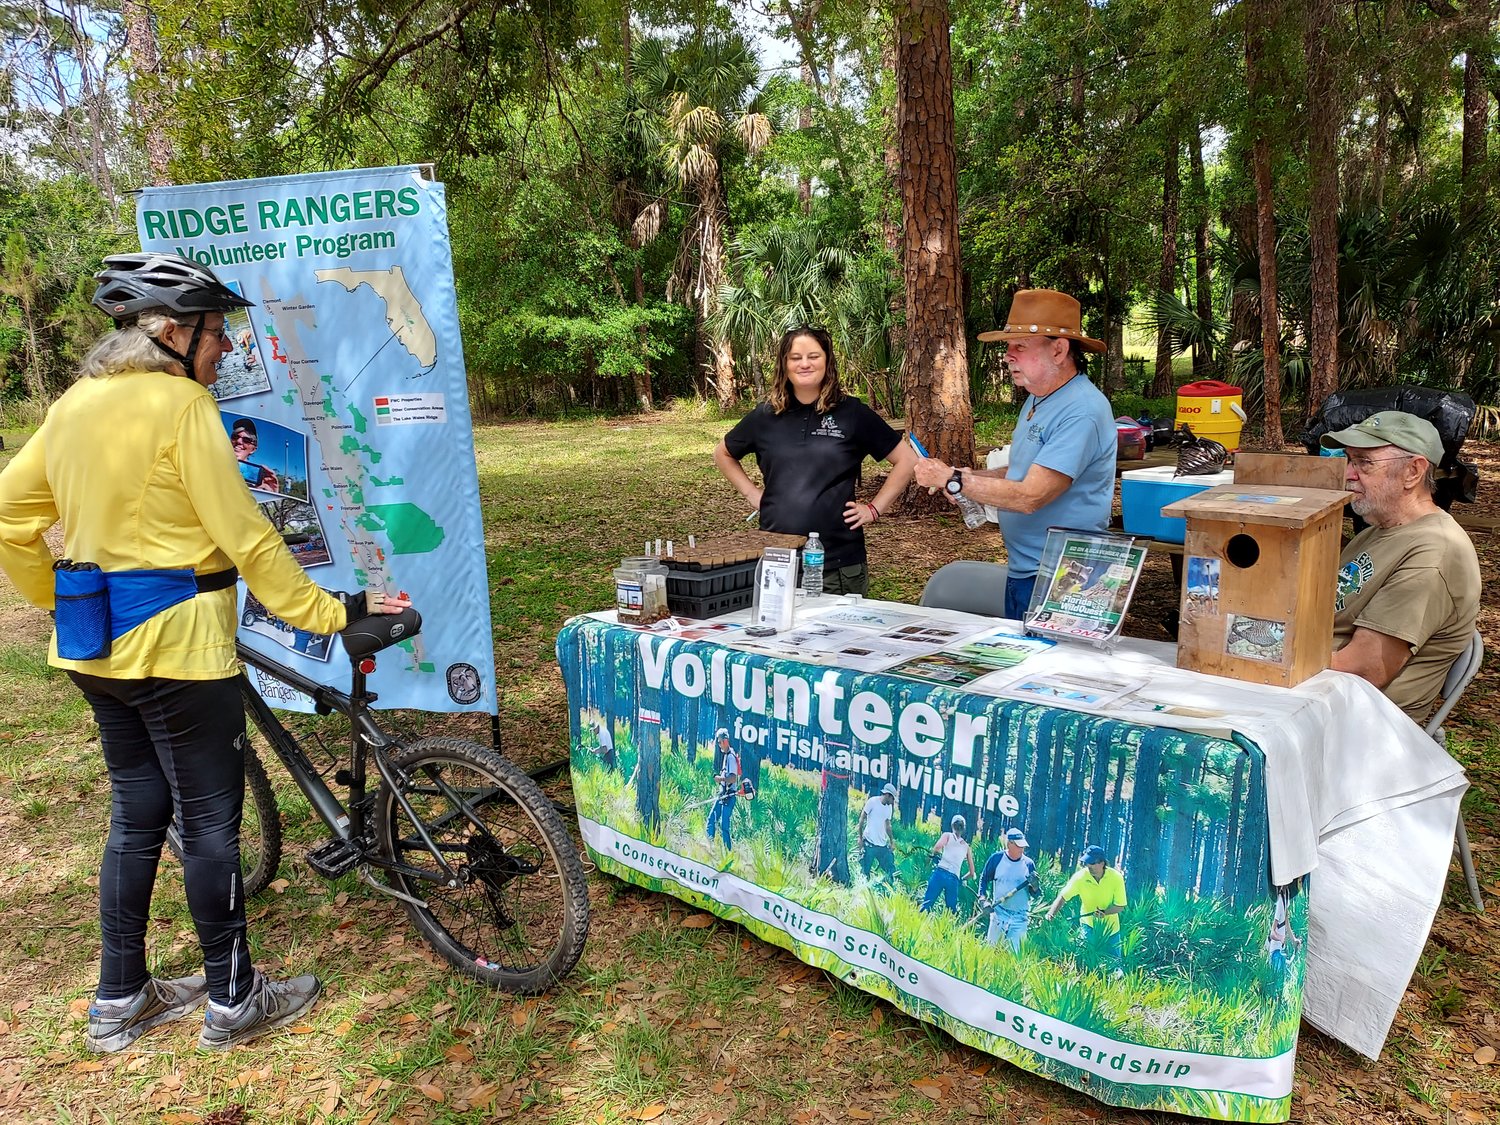 Bicyclist inquires about FWC Ridge Ranger Resource Management Volunteer Program at last year’s festival. [Courtesy photo]